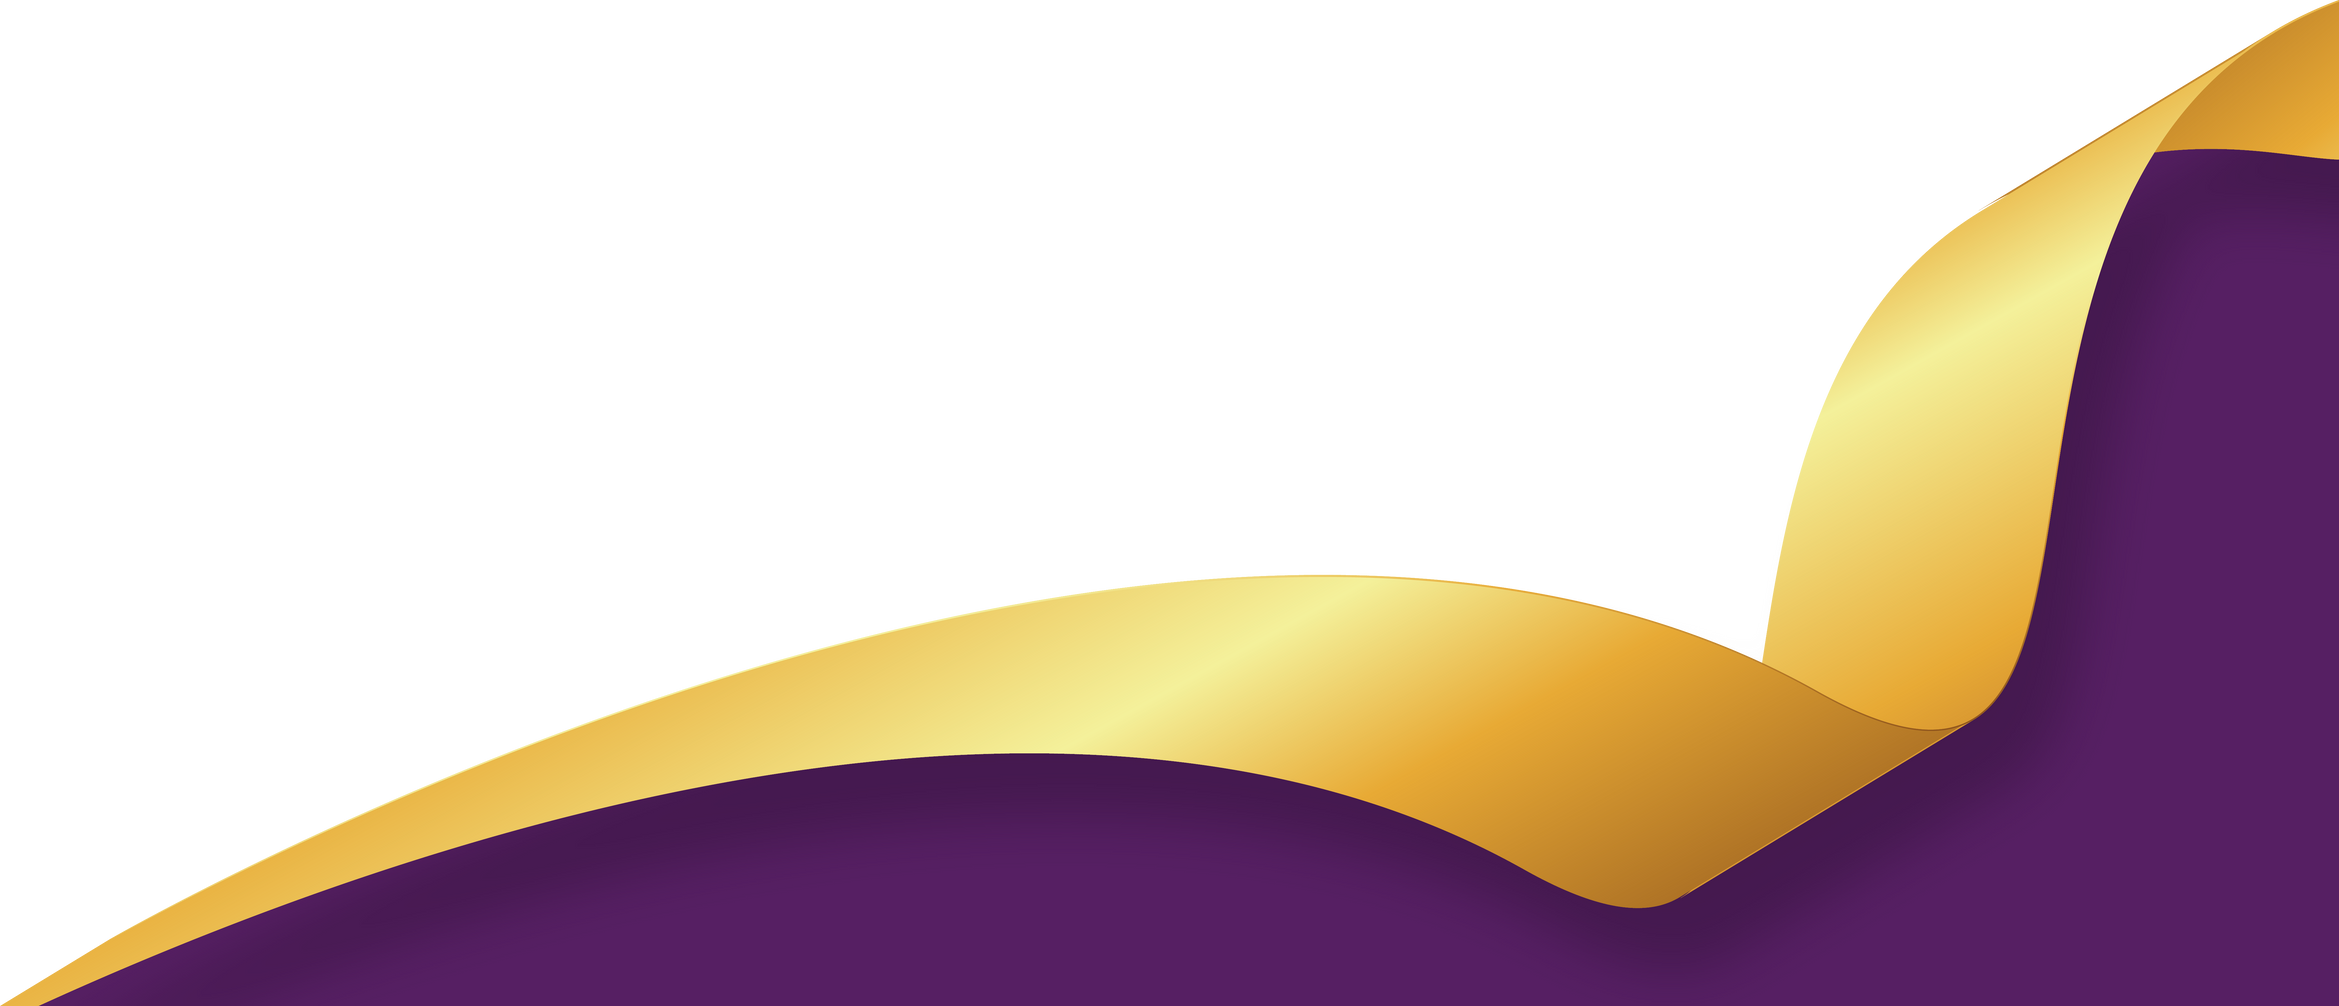 Purple and Gold Curve Border. Wavy Banner.